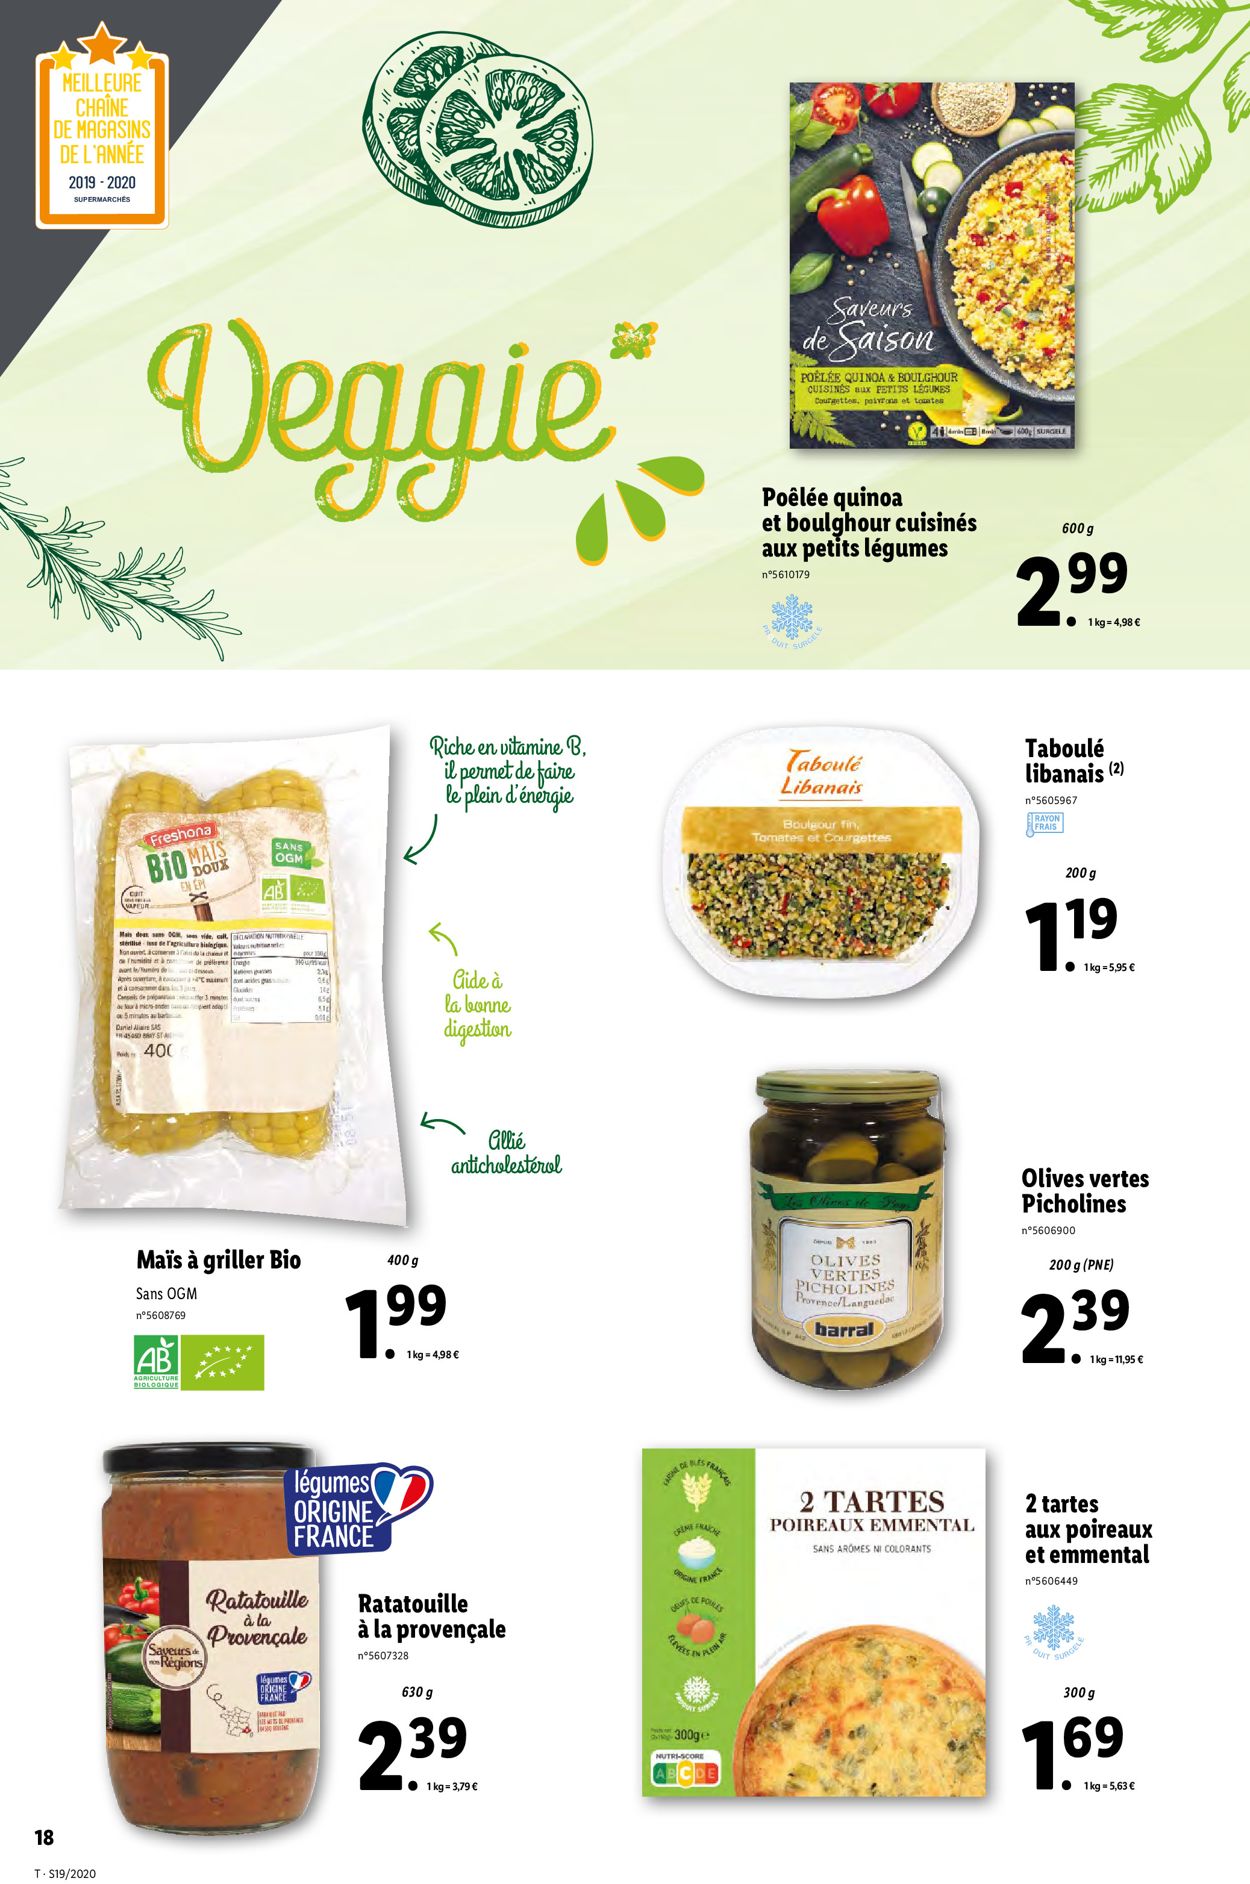 Lidl Catalogue - 06.05-12.05.2020 (Page 18)